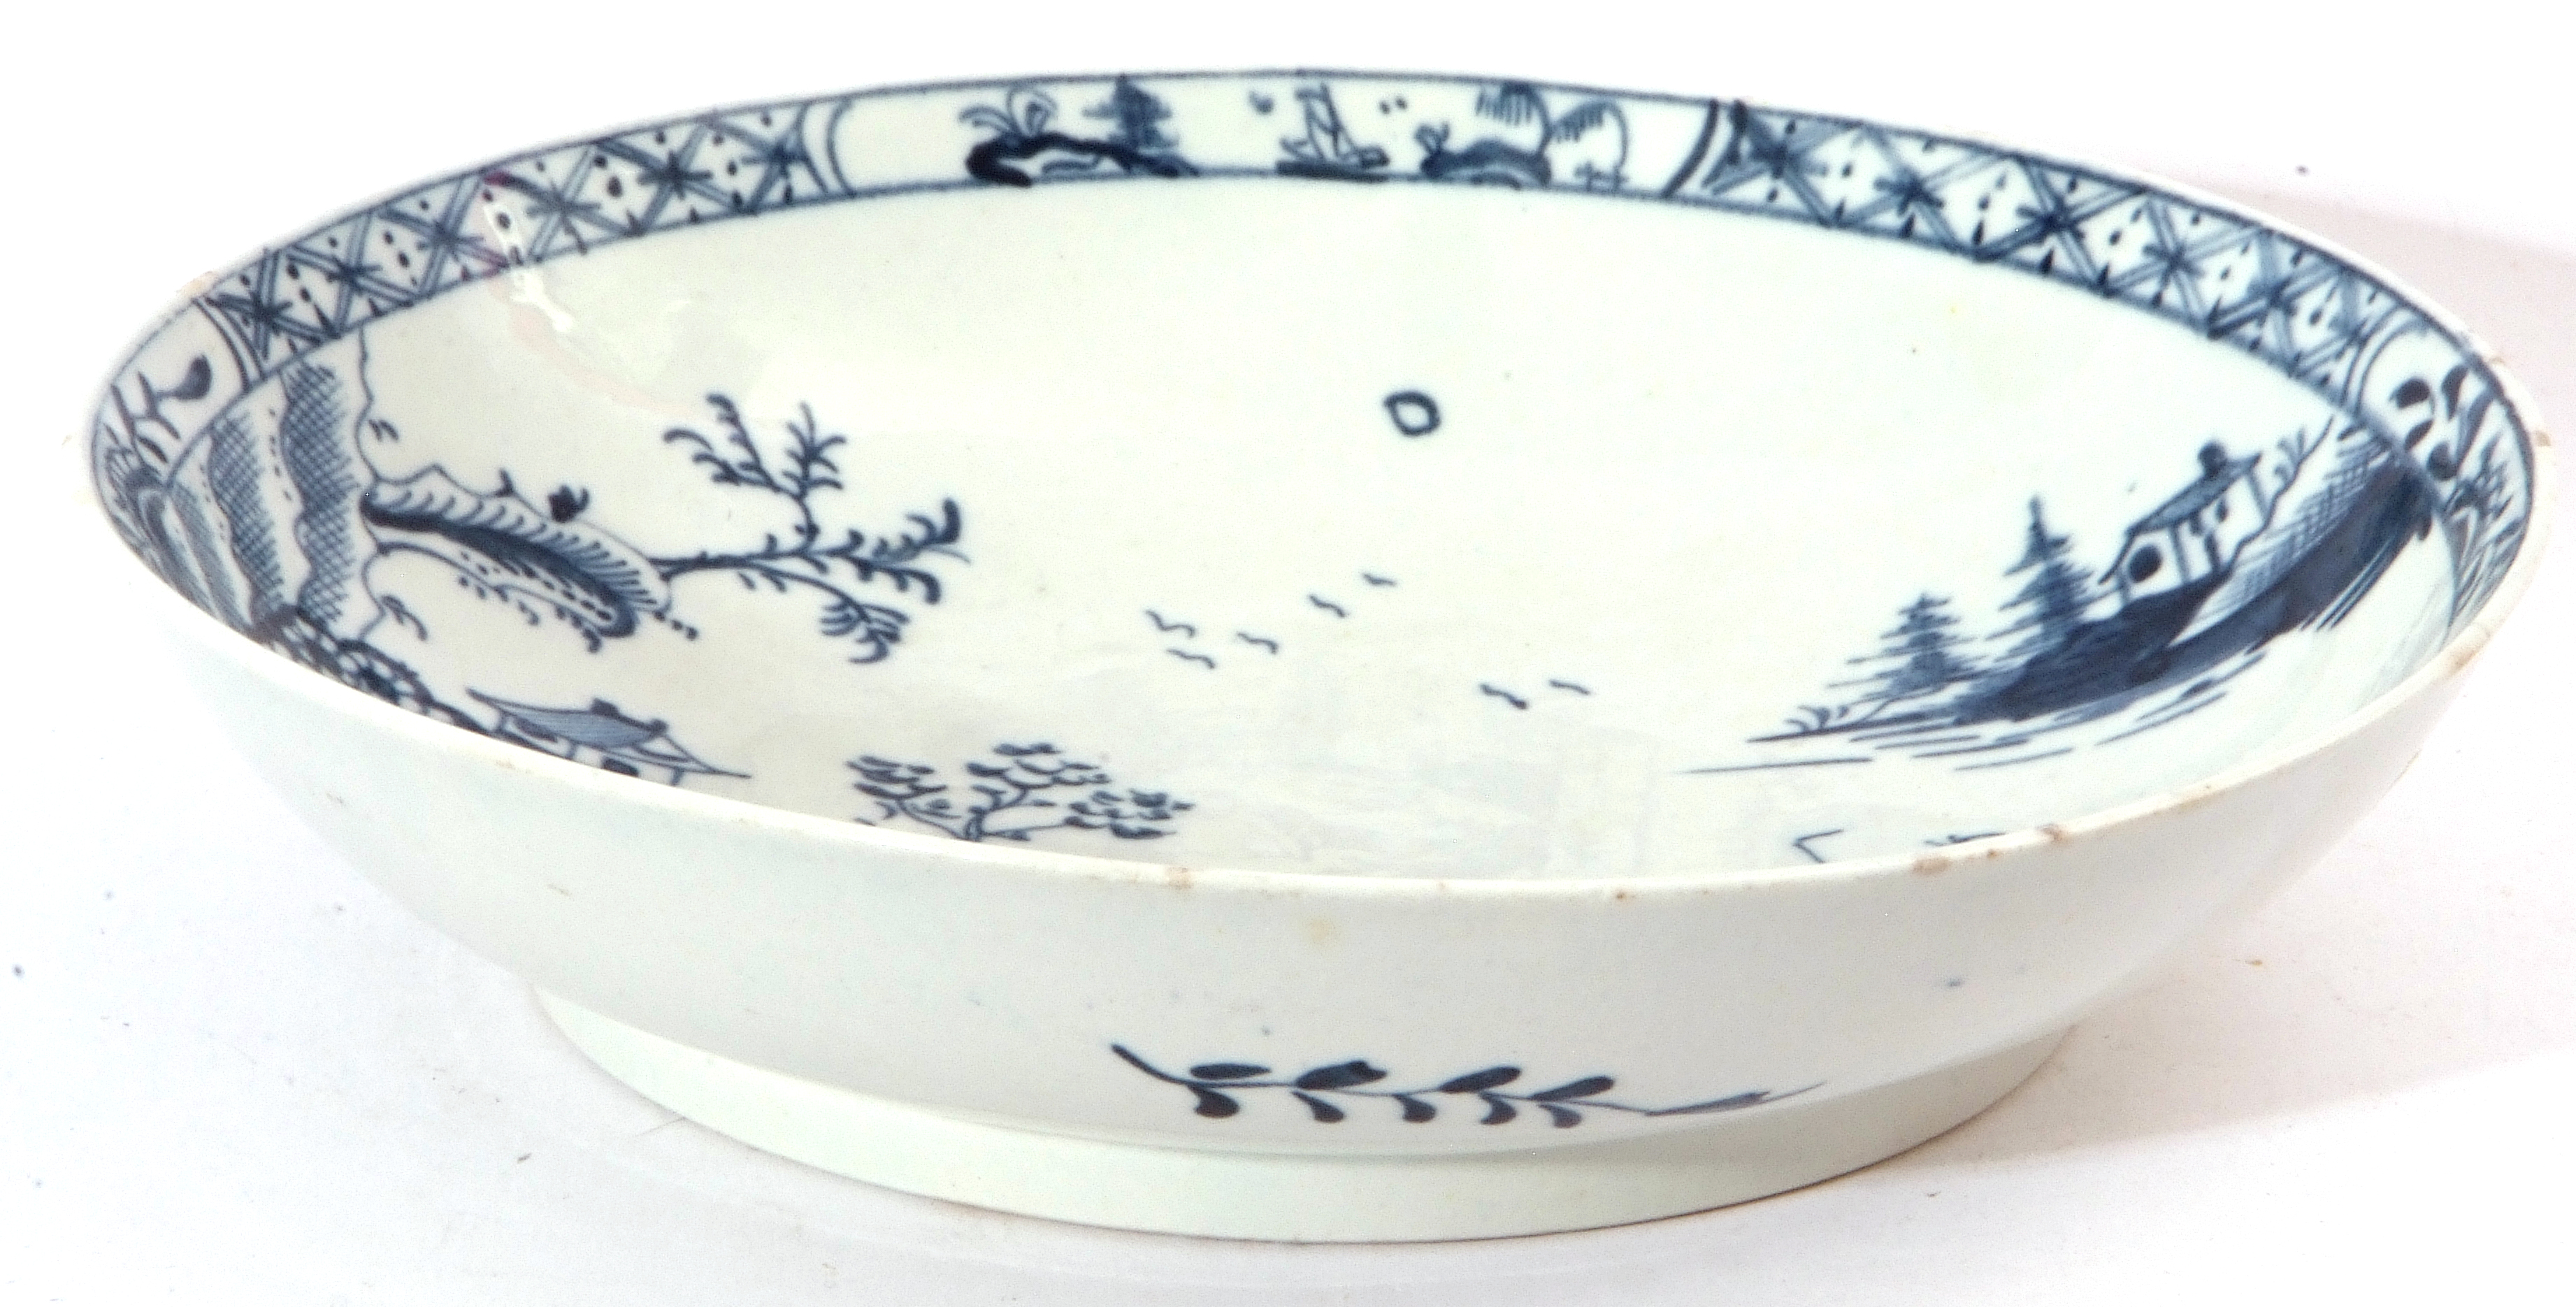 Lowestoft porcelain saucer dish decorated with a chinoiserie river scene, the border with small - Image 3 of 7